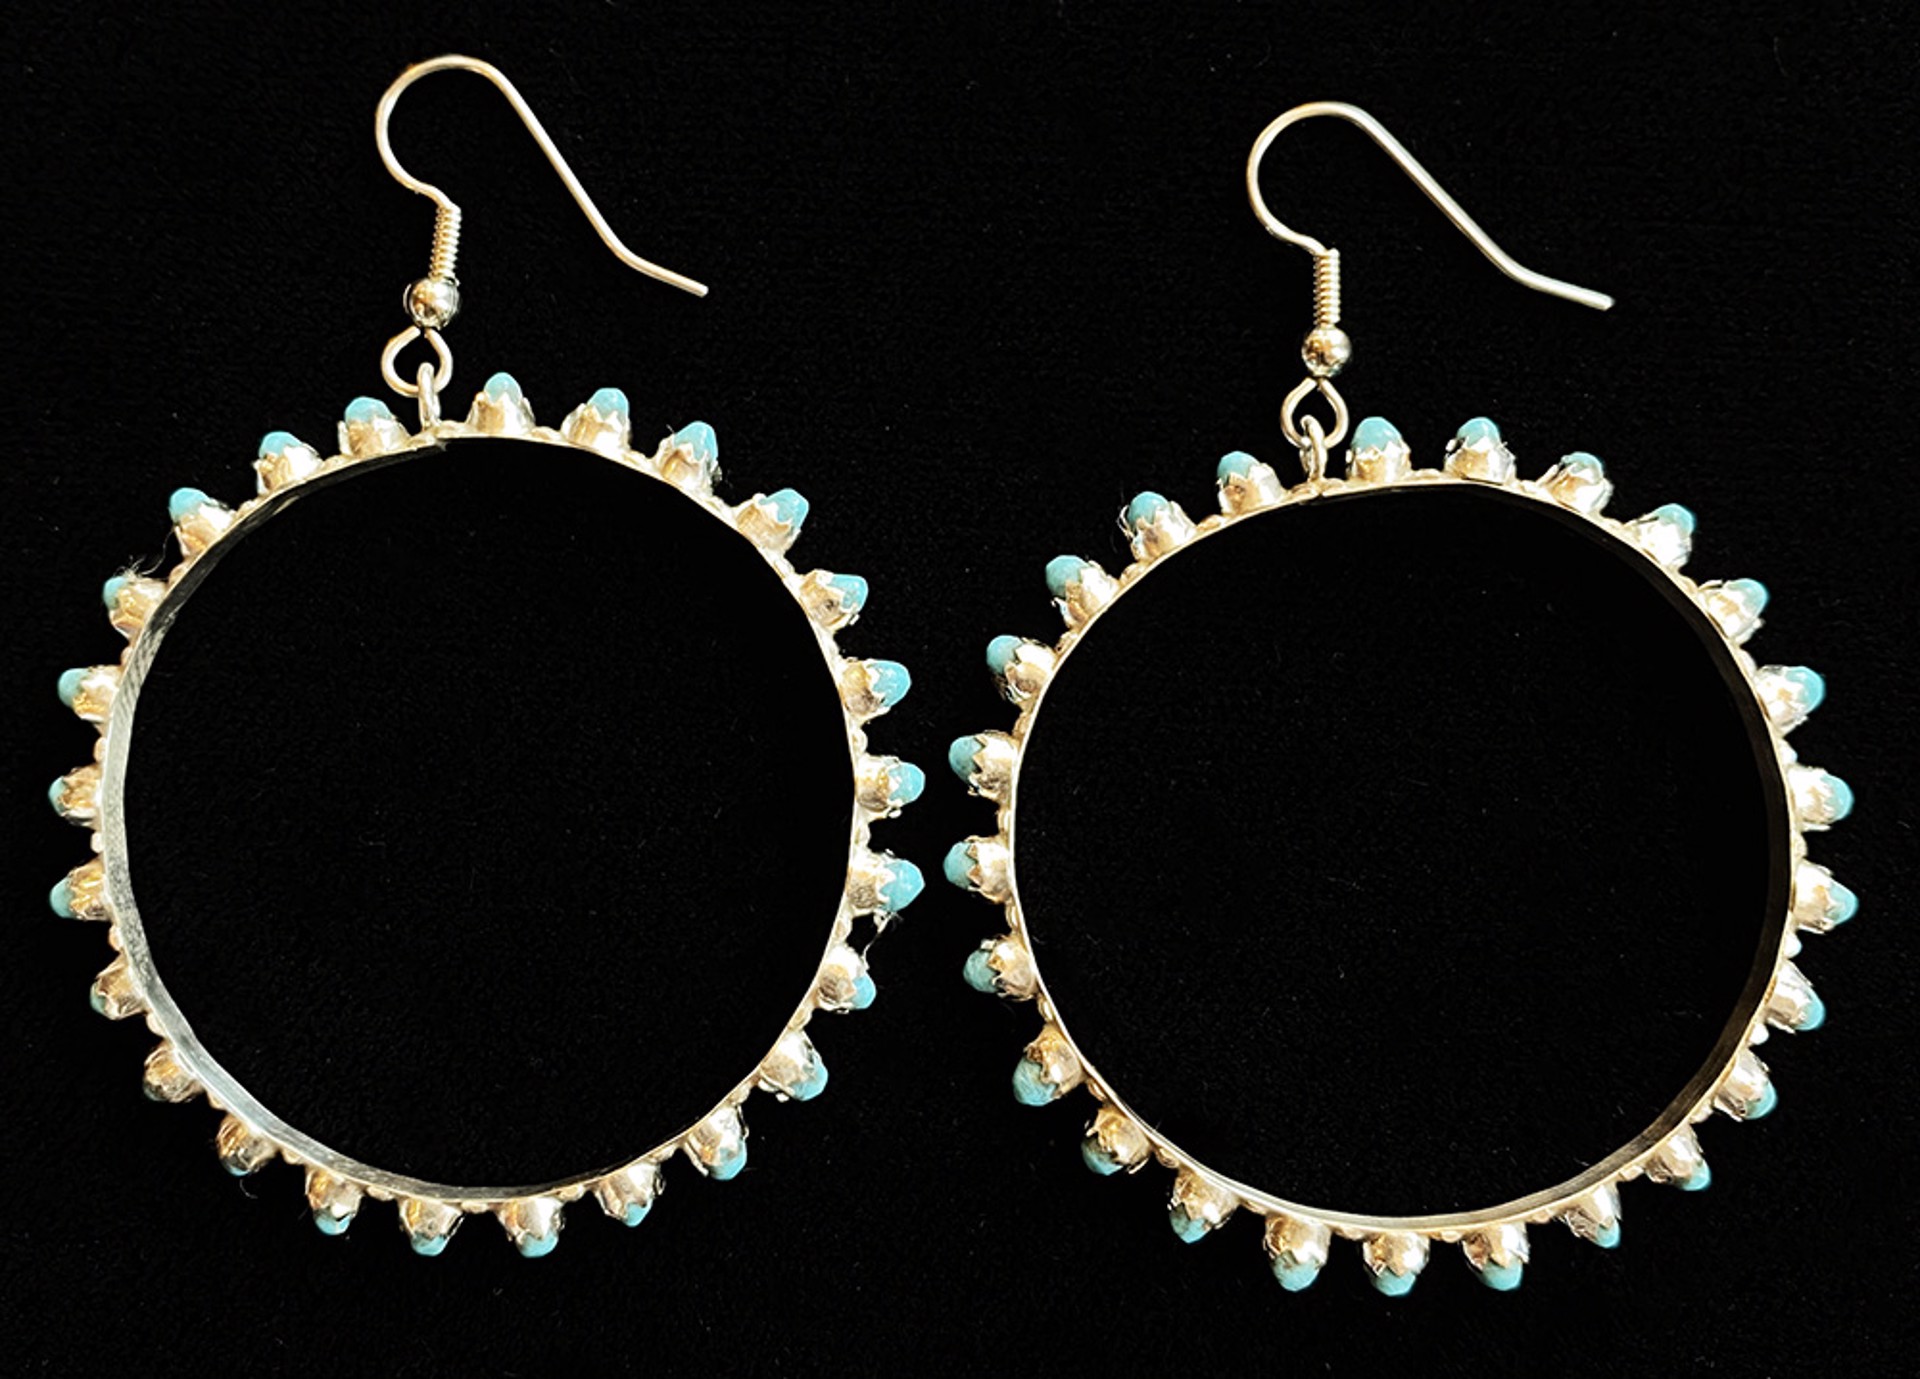 Turquoise Studded Hoops by Artist Unknown